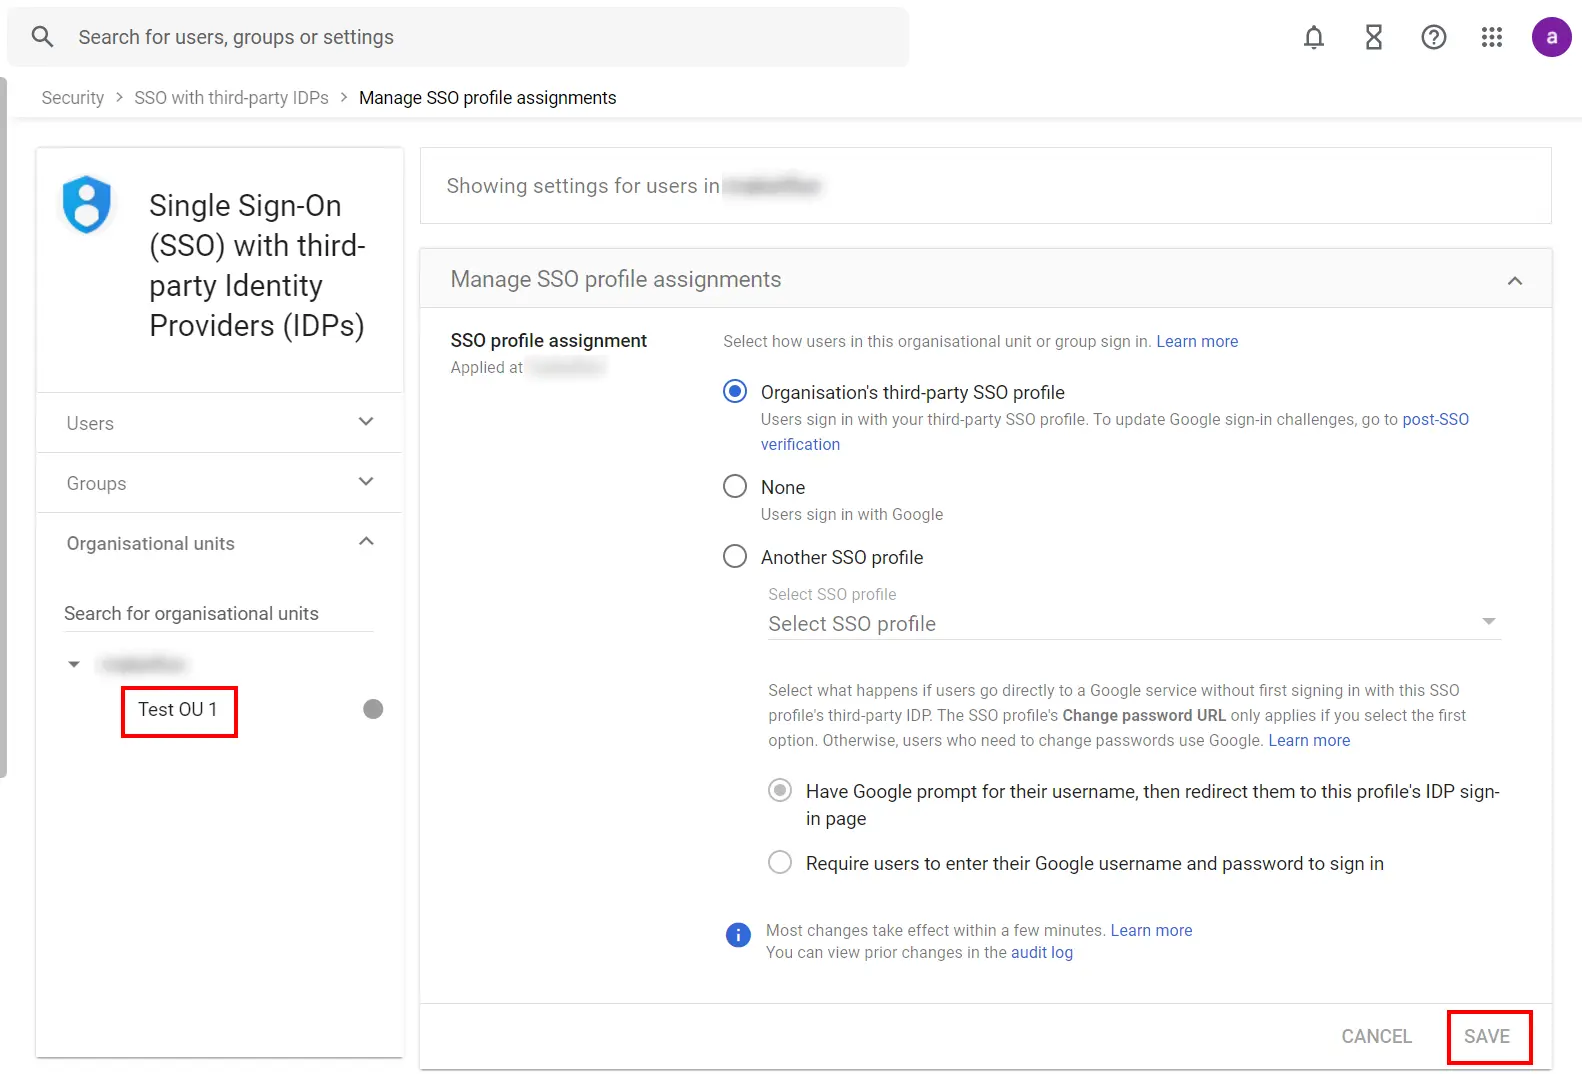 location restriction for Google Workspace (G Suite): select the OU or group for assigning the SSO Profile